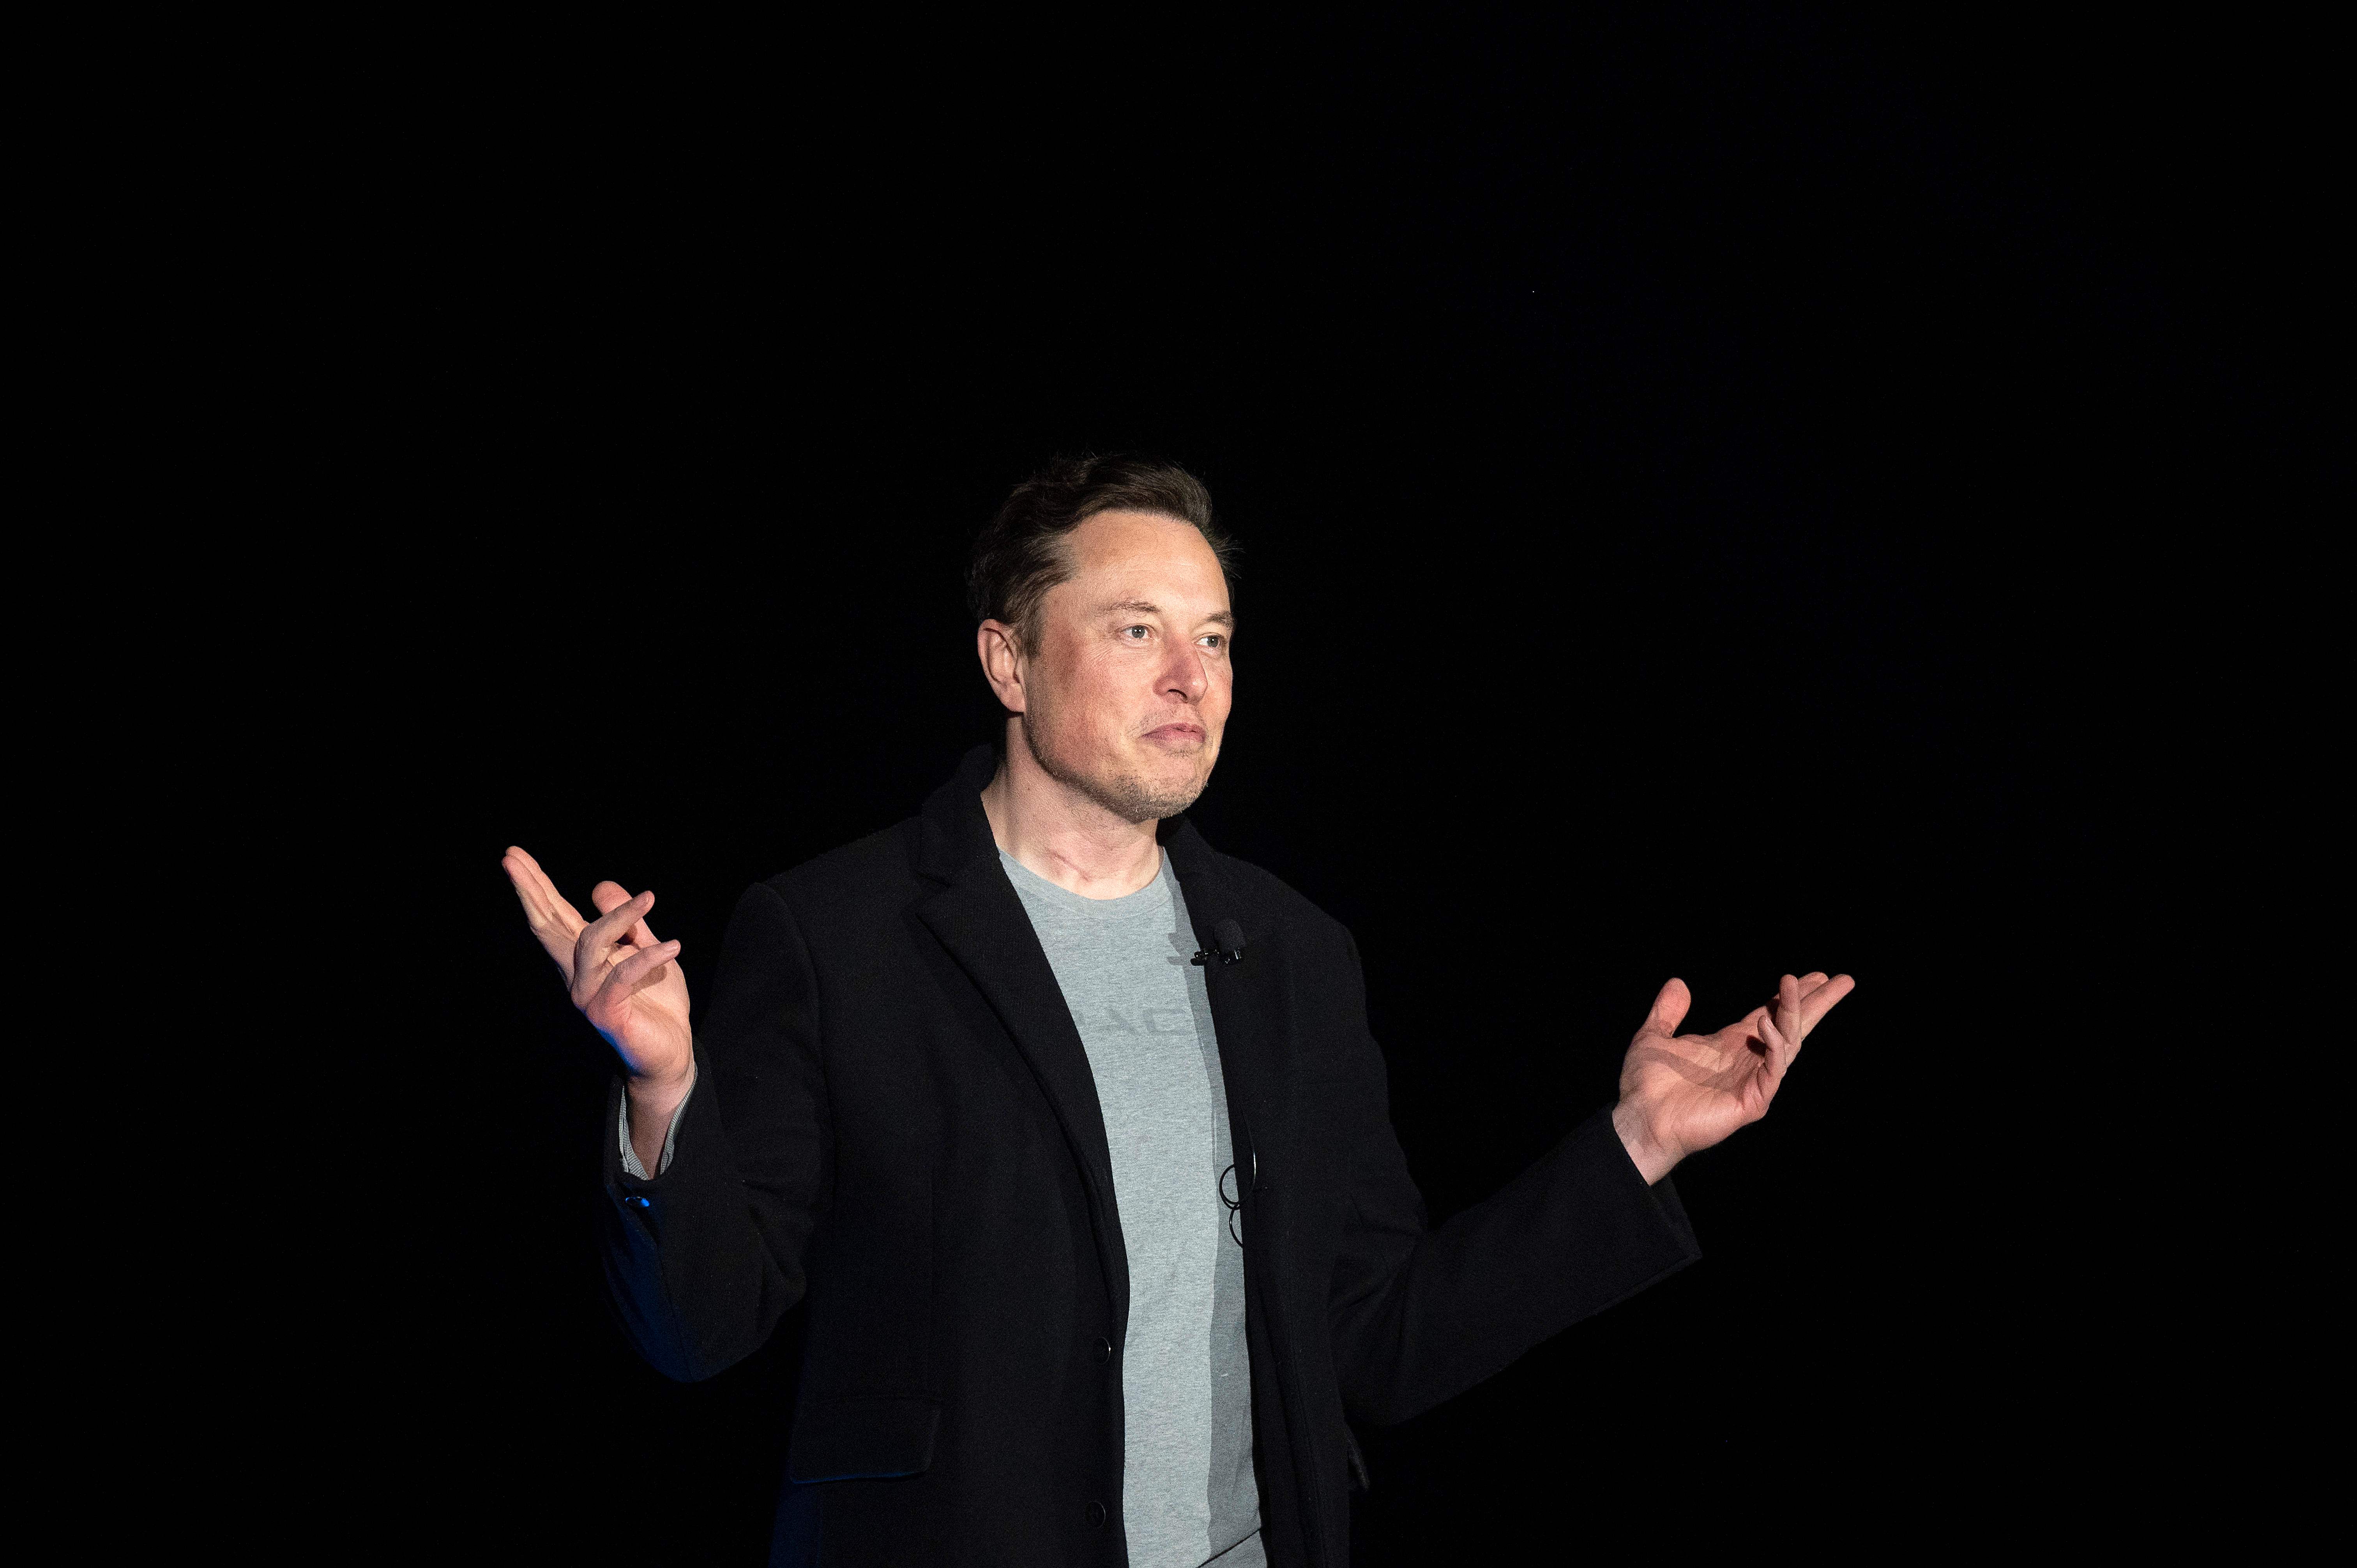 Elon Musk Is Now The Second Richest Person In The World